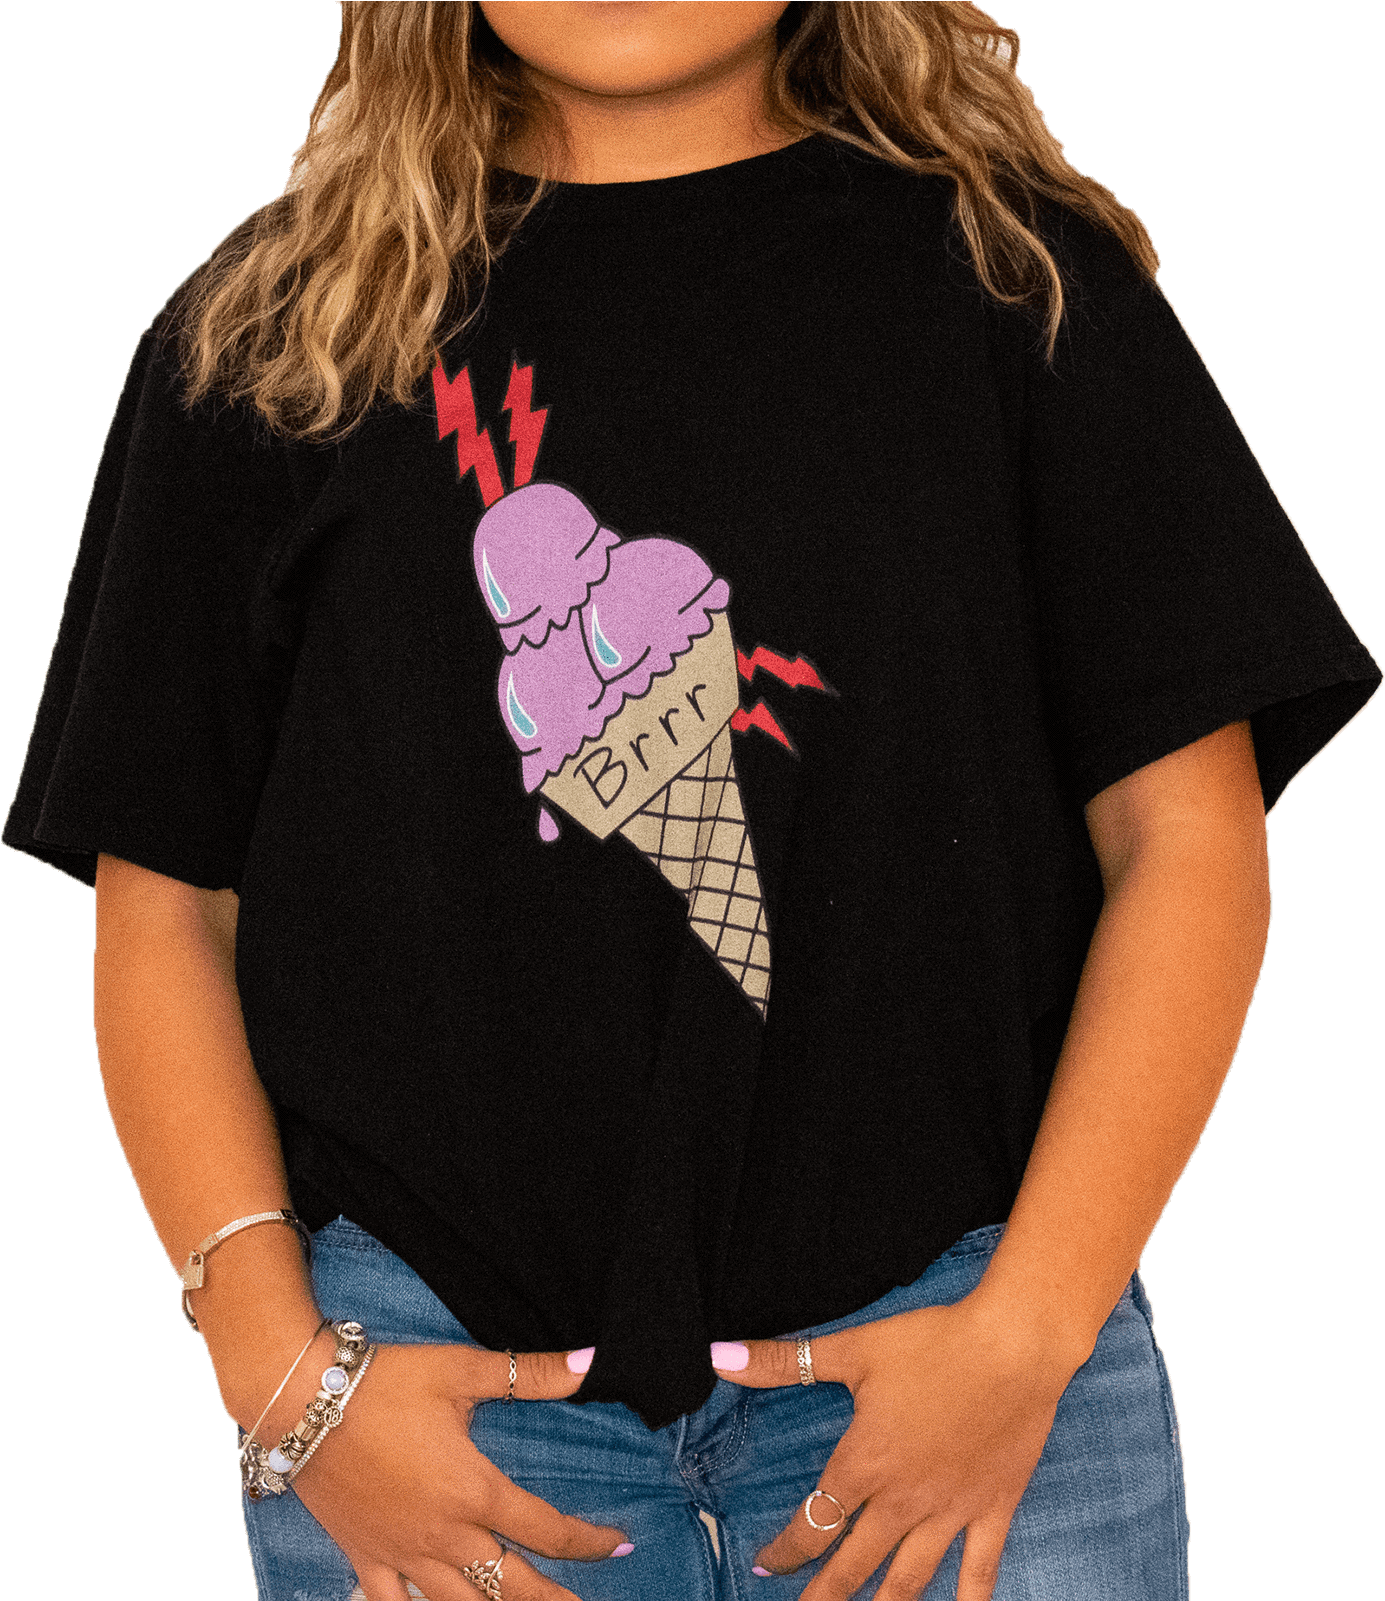 Gucci Mane Ice Cream T-shirt Clipart - Large Size Png Image - PikPng